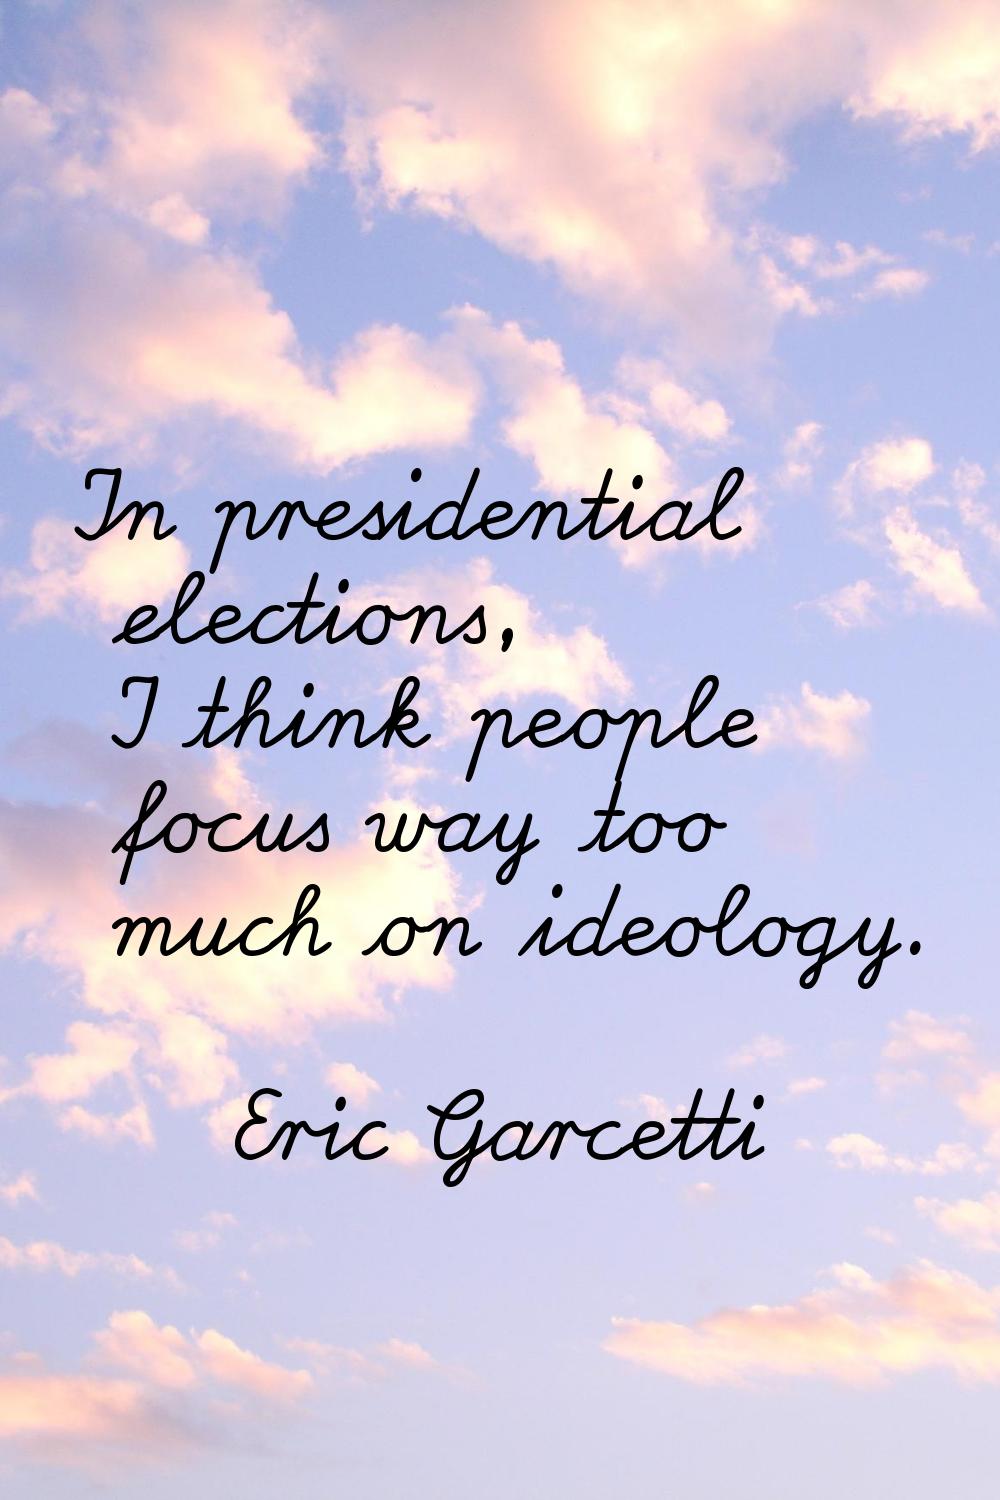 In presidential elections, I think people focus way too much on ideology.